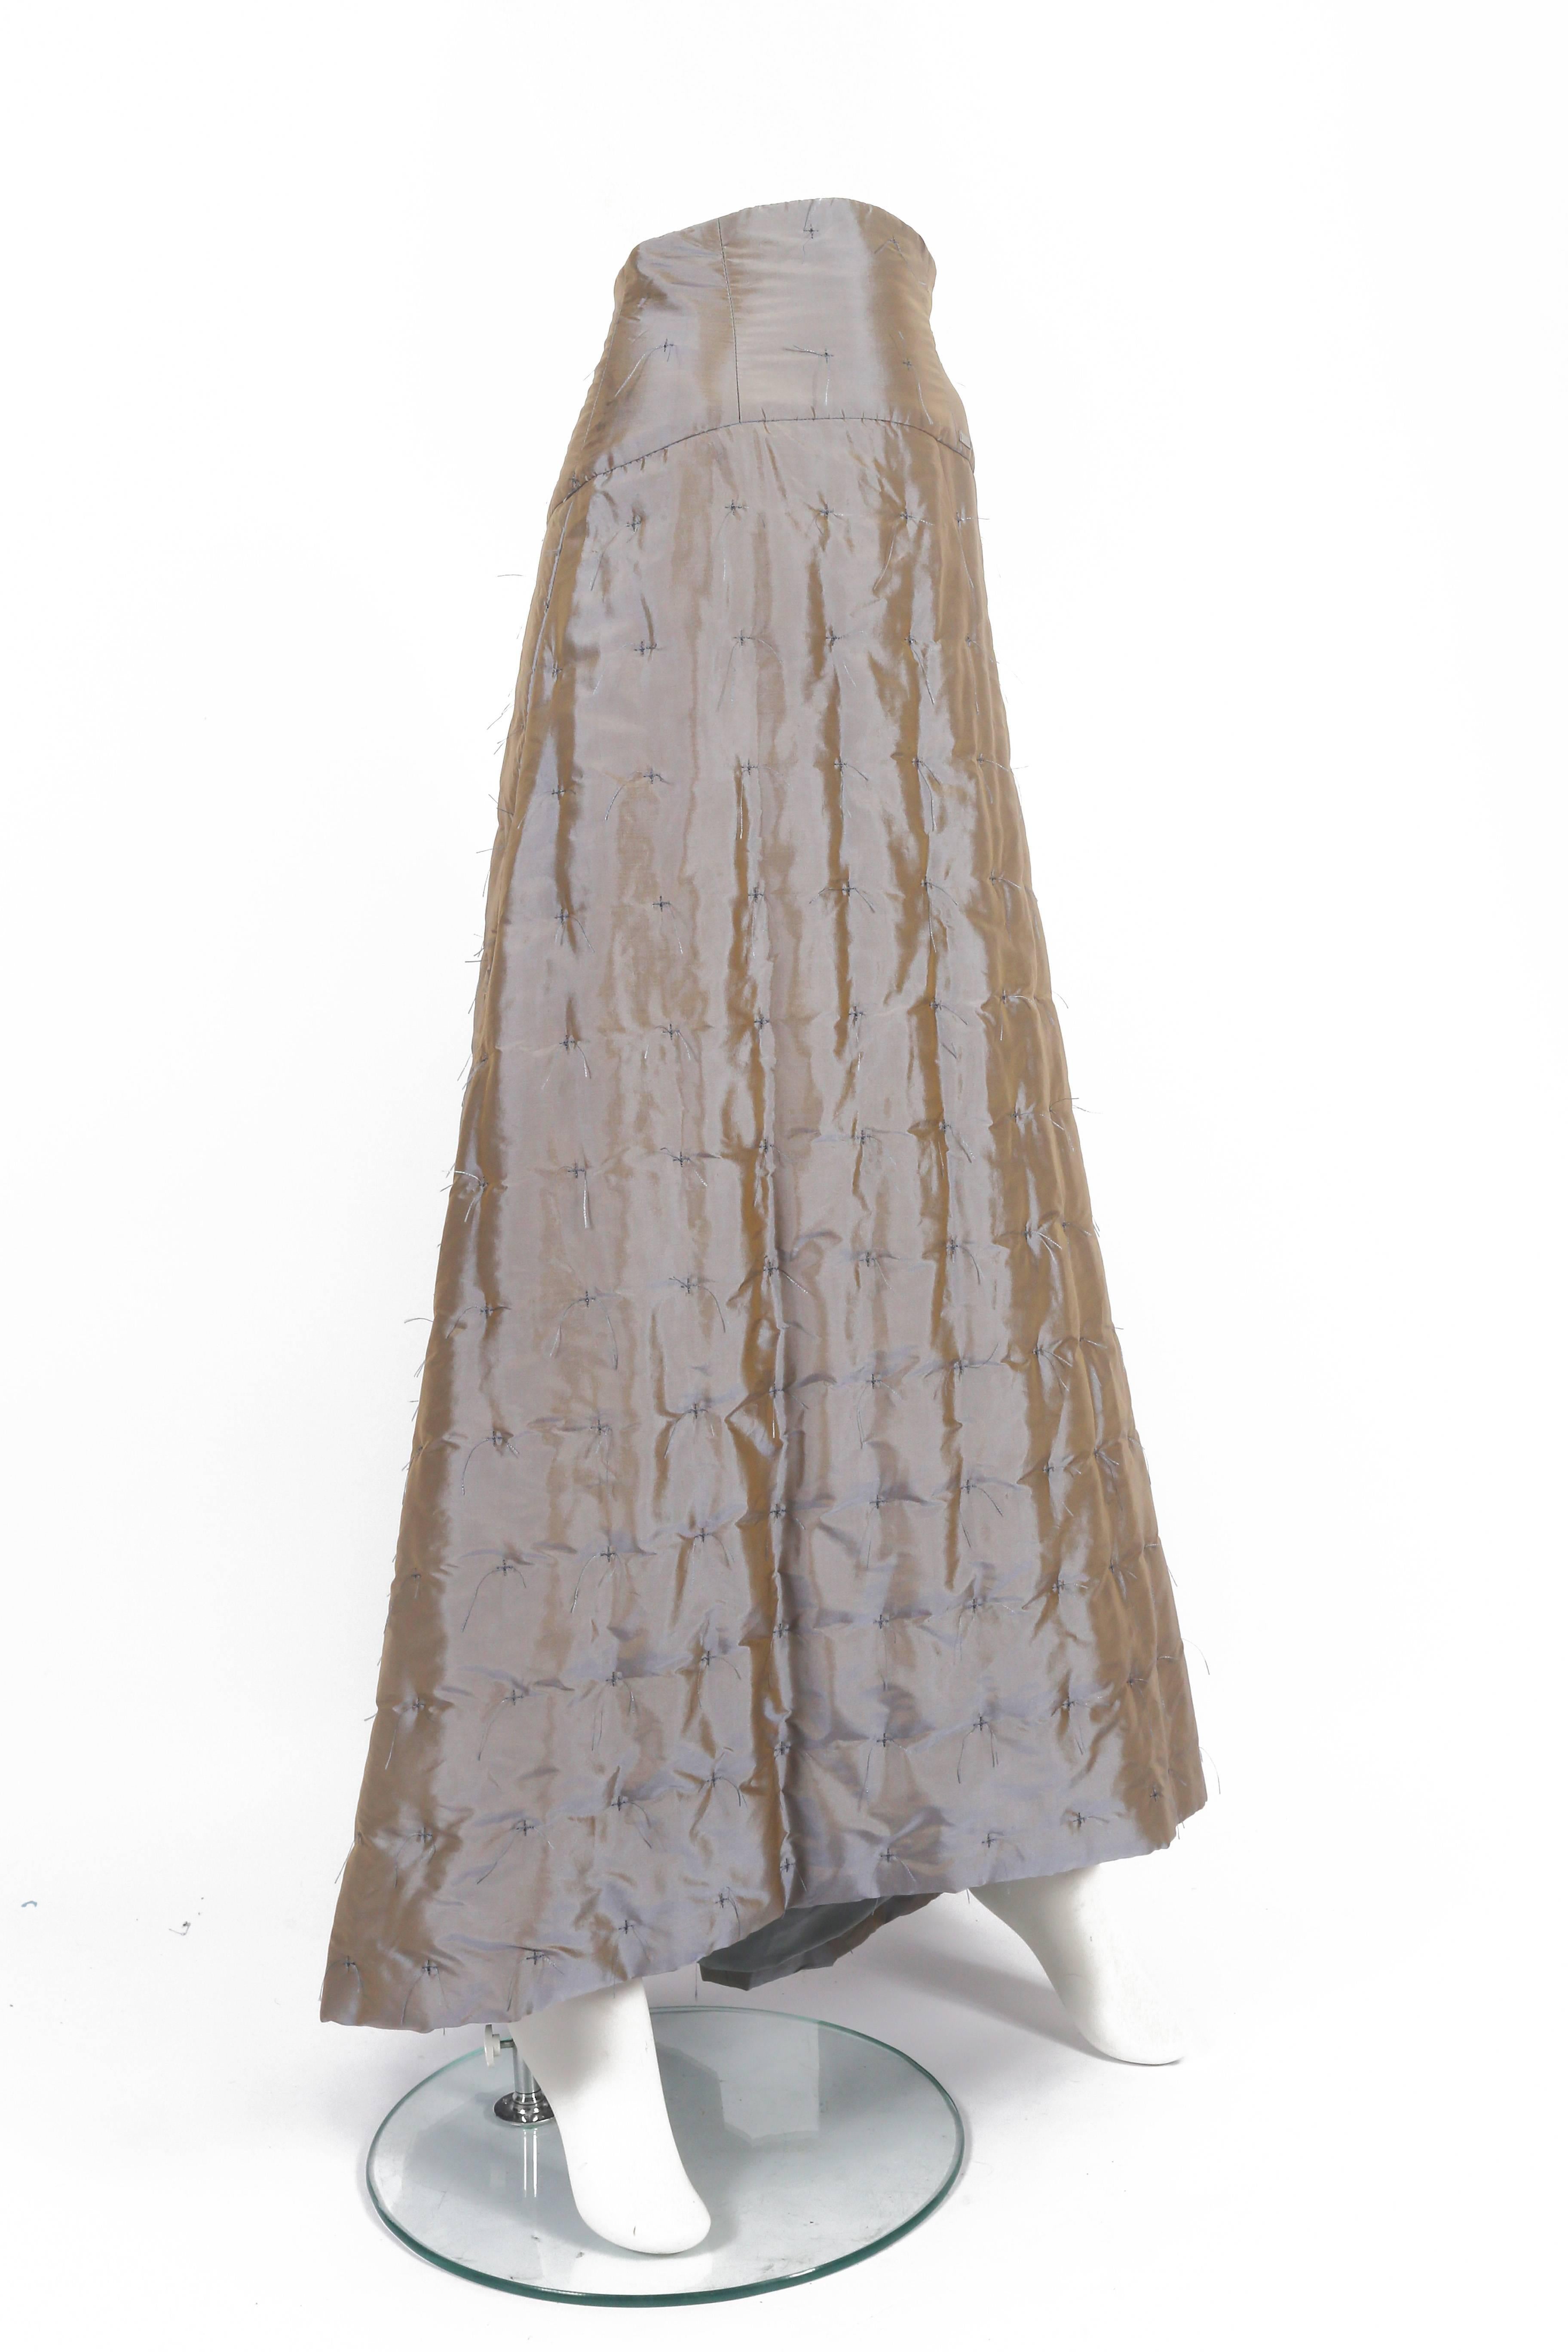 Introducing an enchanting Chanel evening maxi skirt designed by Karl Lagerfeld. This exquisite piece is crafted from iridescent silk taffeta, exuding opulence and sophistication. The quilted allover pattern, adorned with delicate cross-stitches,